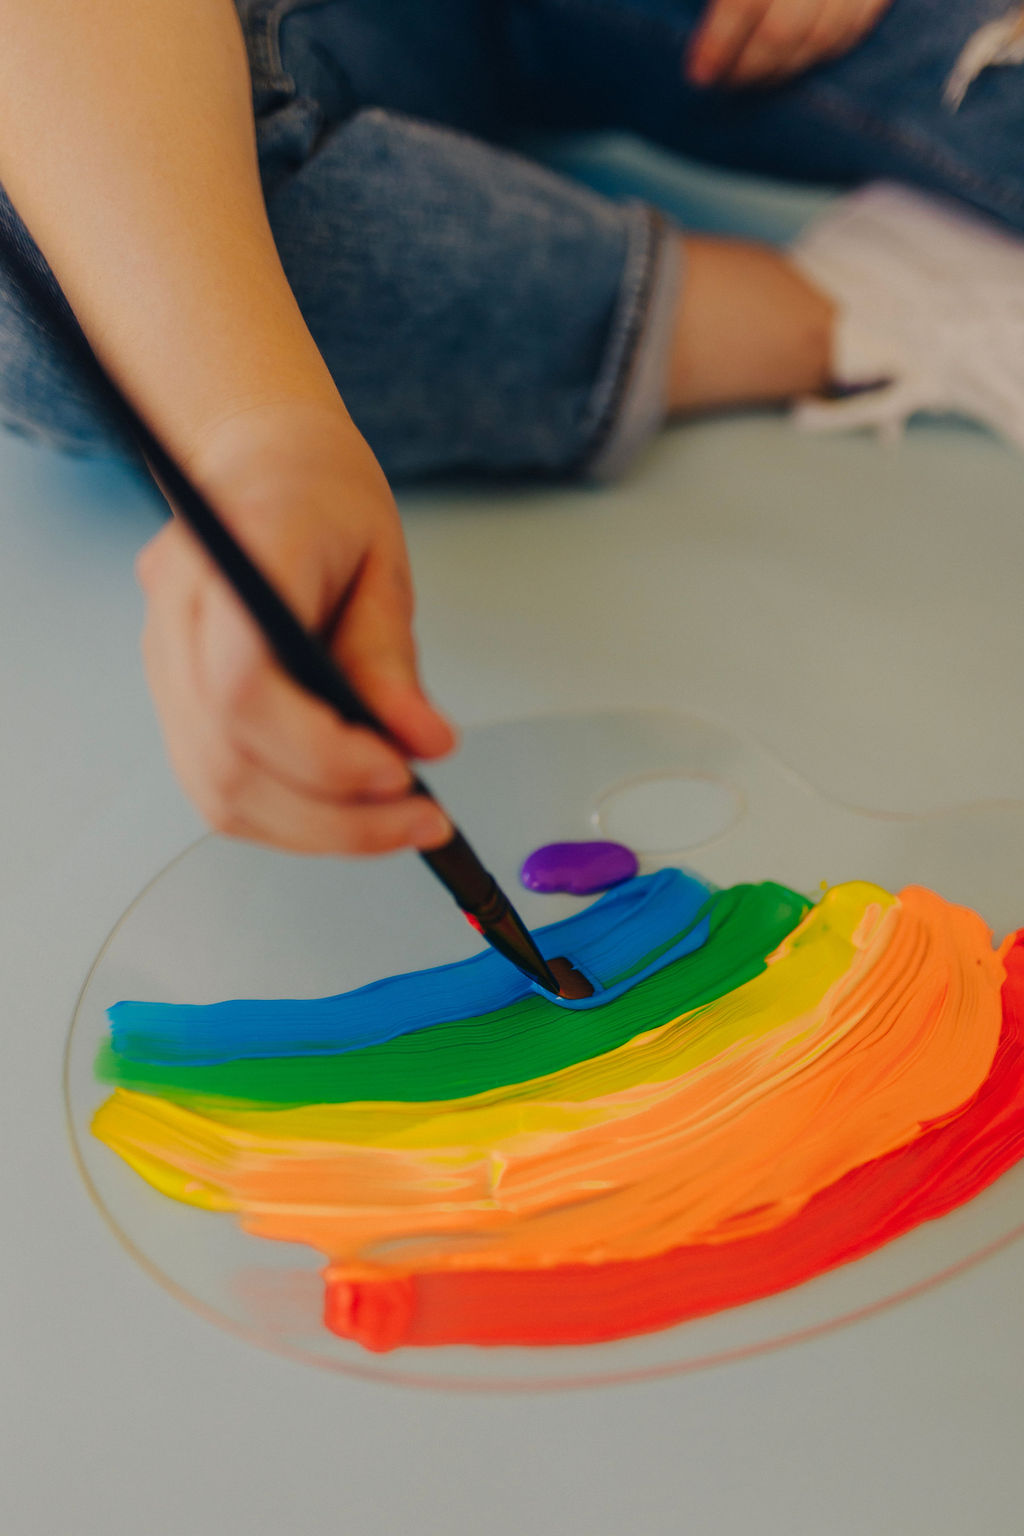 Featured image for how to choose a web designer. A girl is painting rainbow colors on a palette.